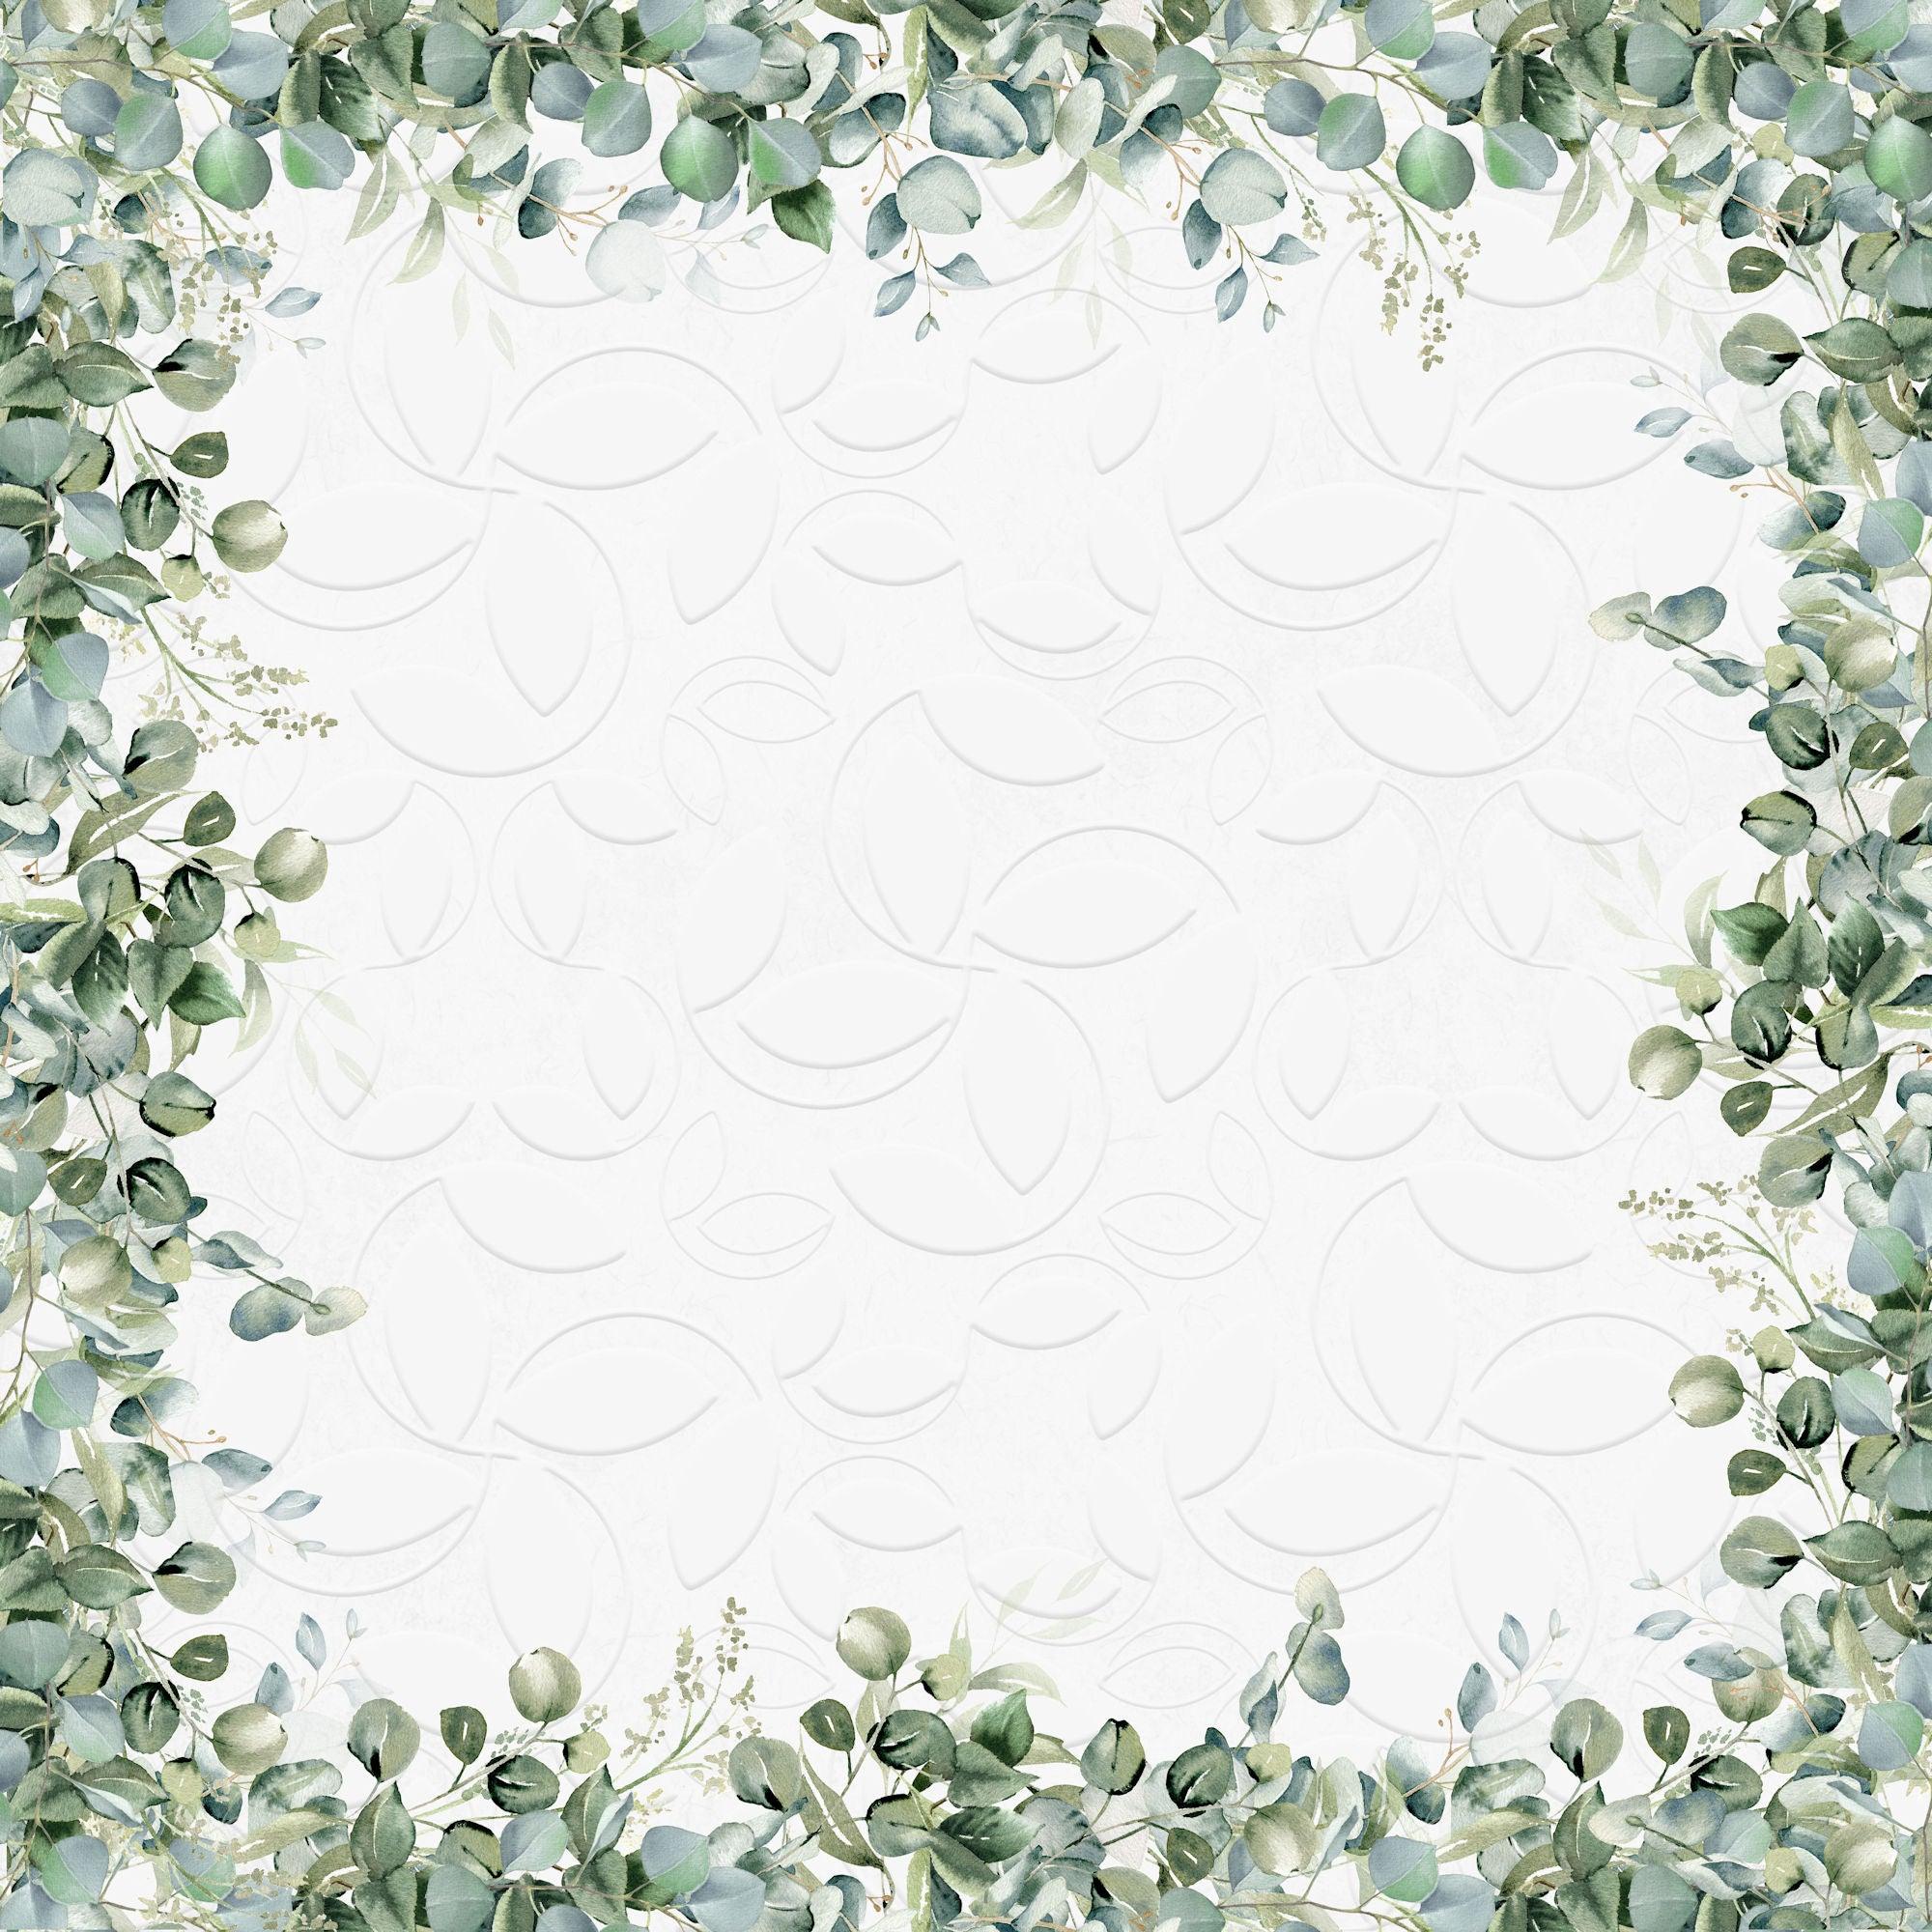 Love Always Collection White Wedding 12 x 12 Double-Sided Scrapbook Paper by SSC Designs - Scrapbook Supply Companies